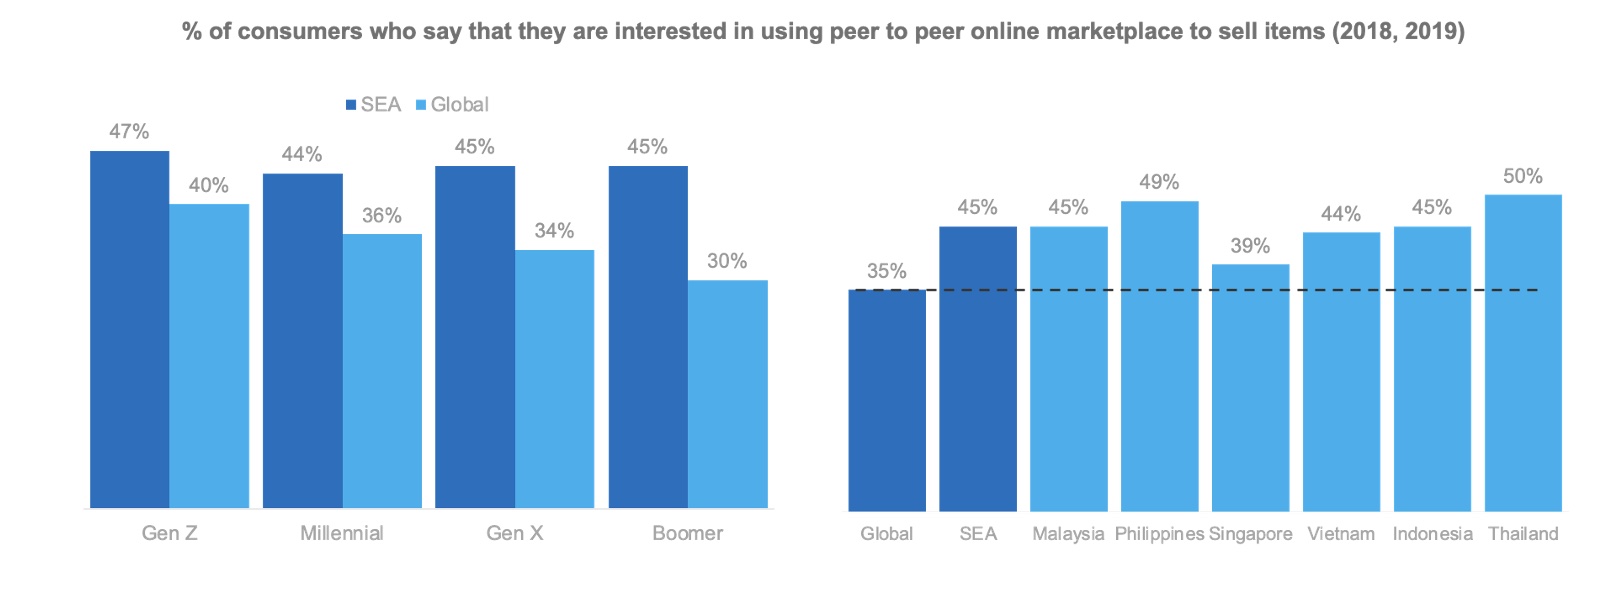 Southeast Asians show higher preference for P2P online marketplaces than other regions